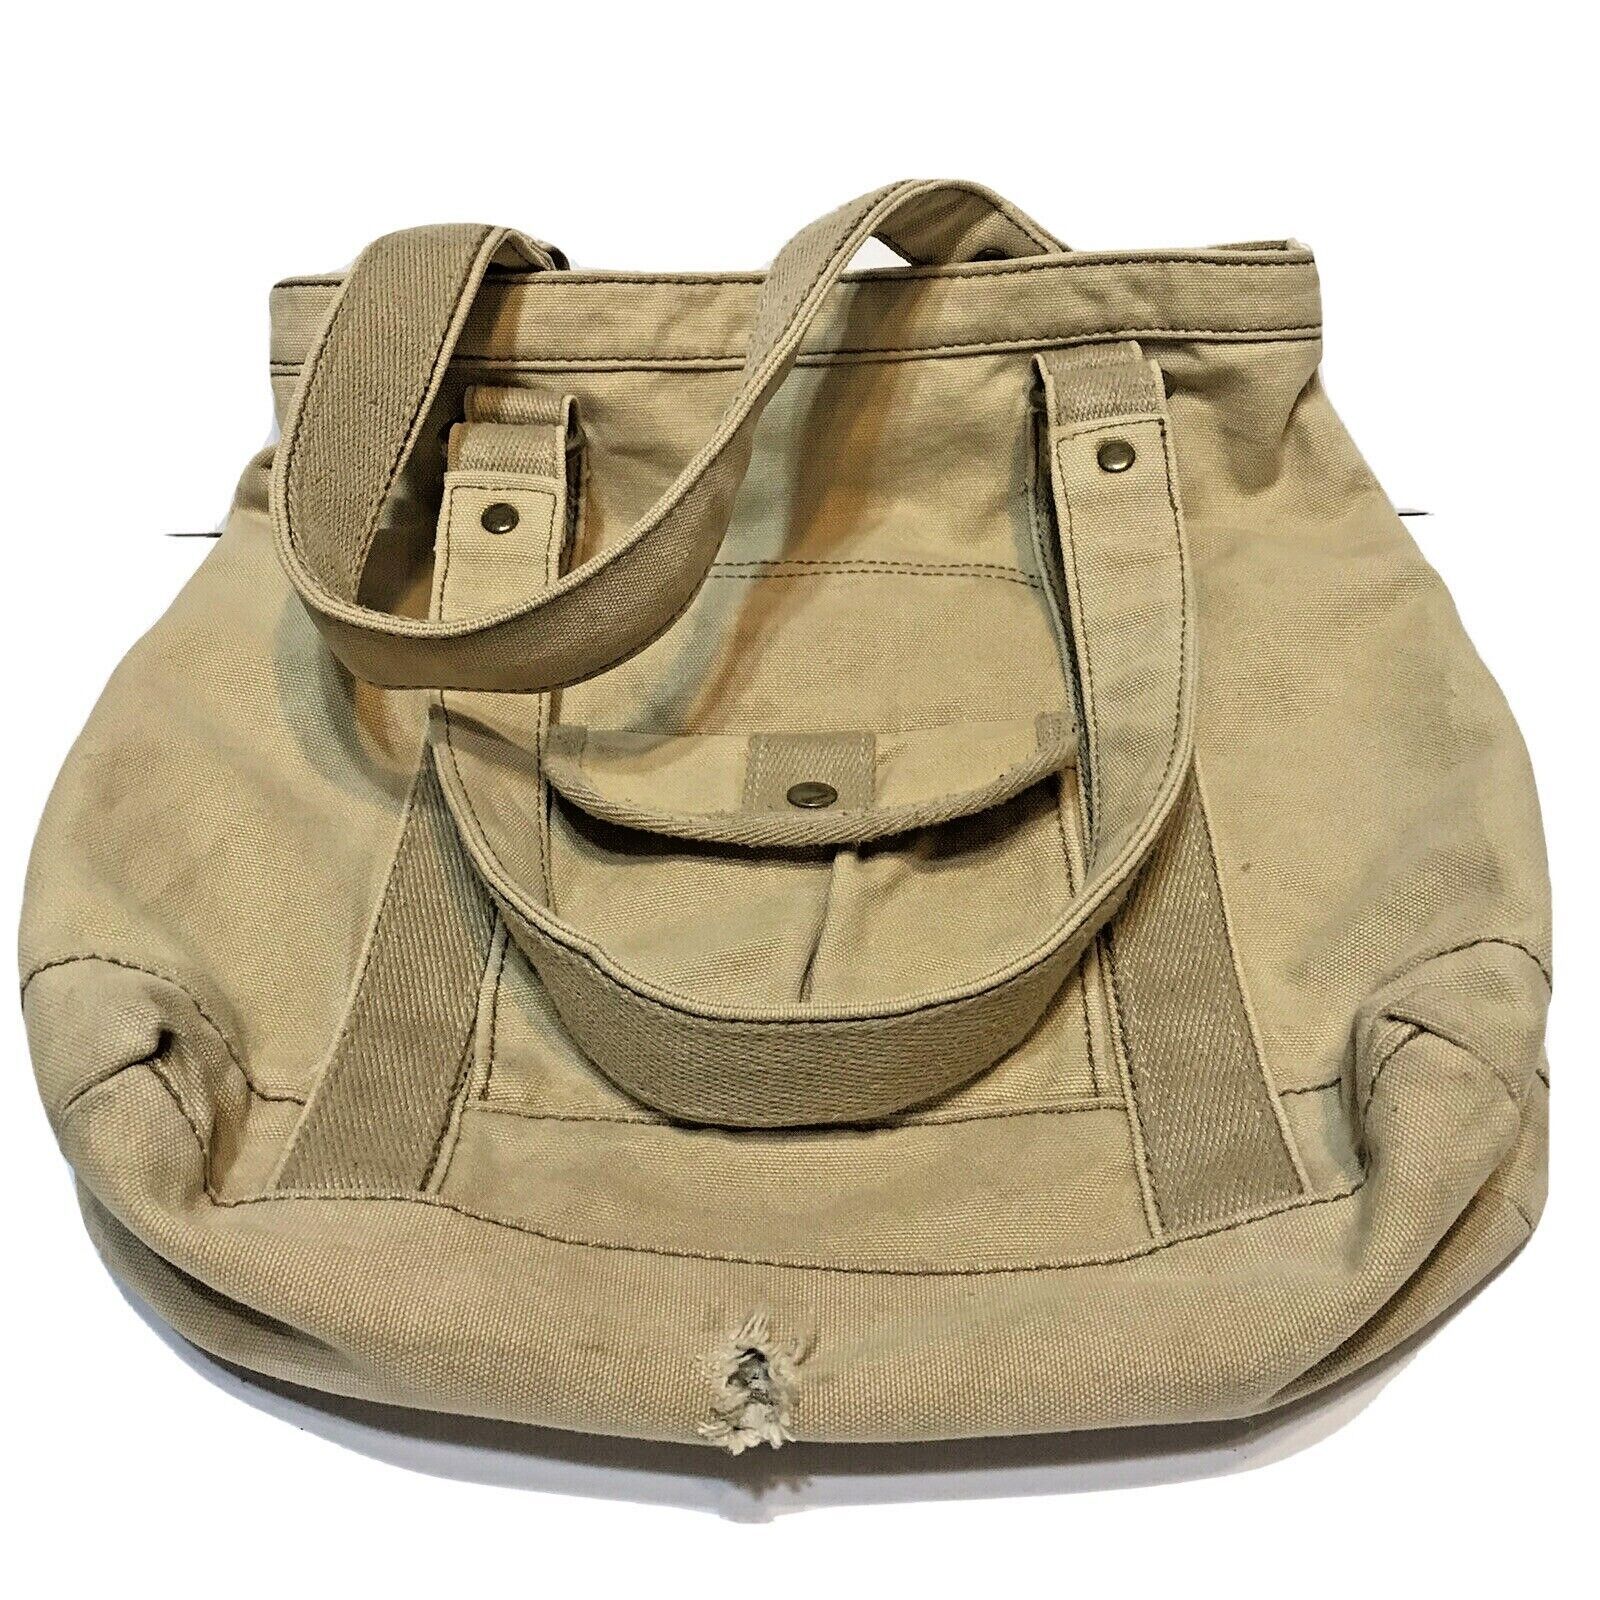 Primary image for Aeropostale Vintage Distressed Canvas Hobo Purse RN 117161 Tan 15x12